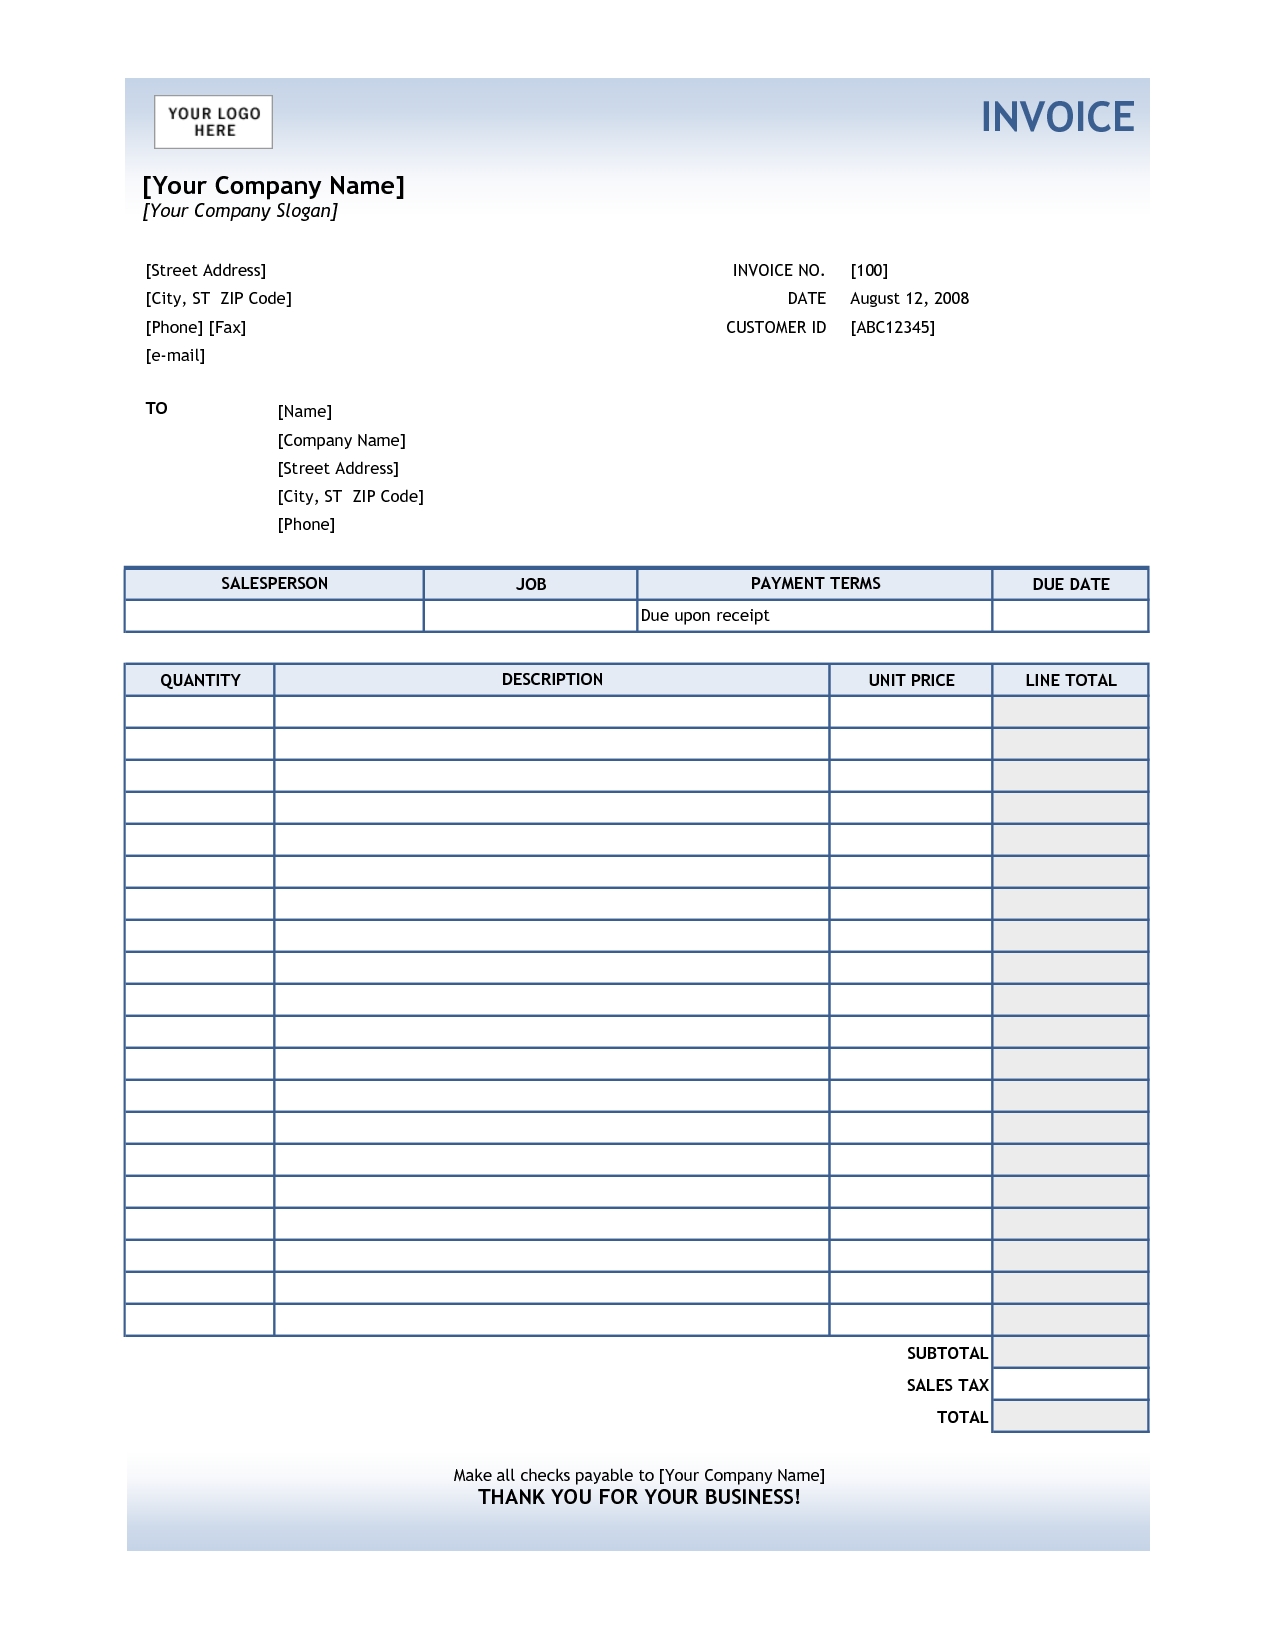 blank excel invoice template